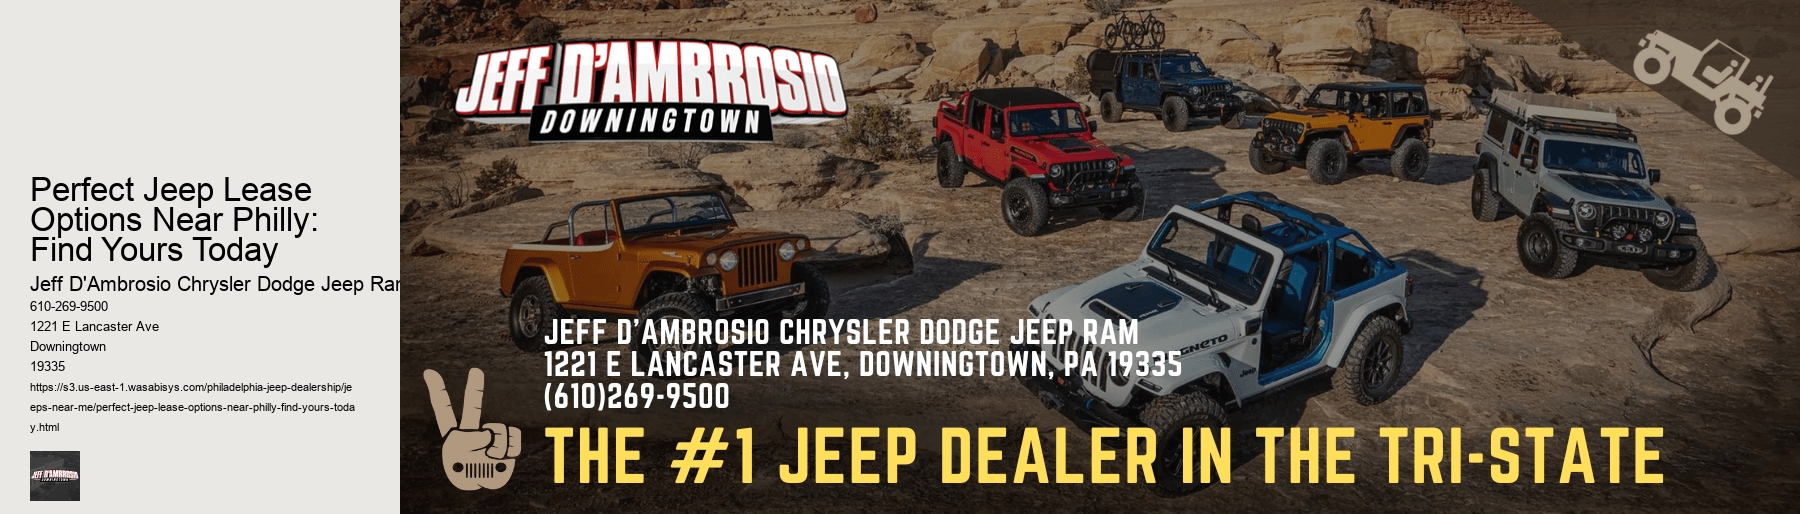 Perfect Jeep Lease Options Near Philly: Find Yours Today